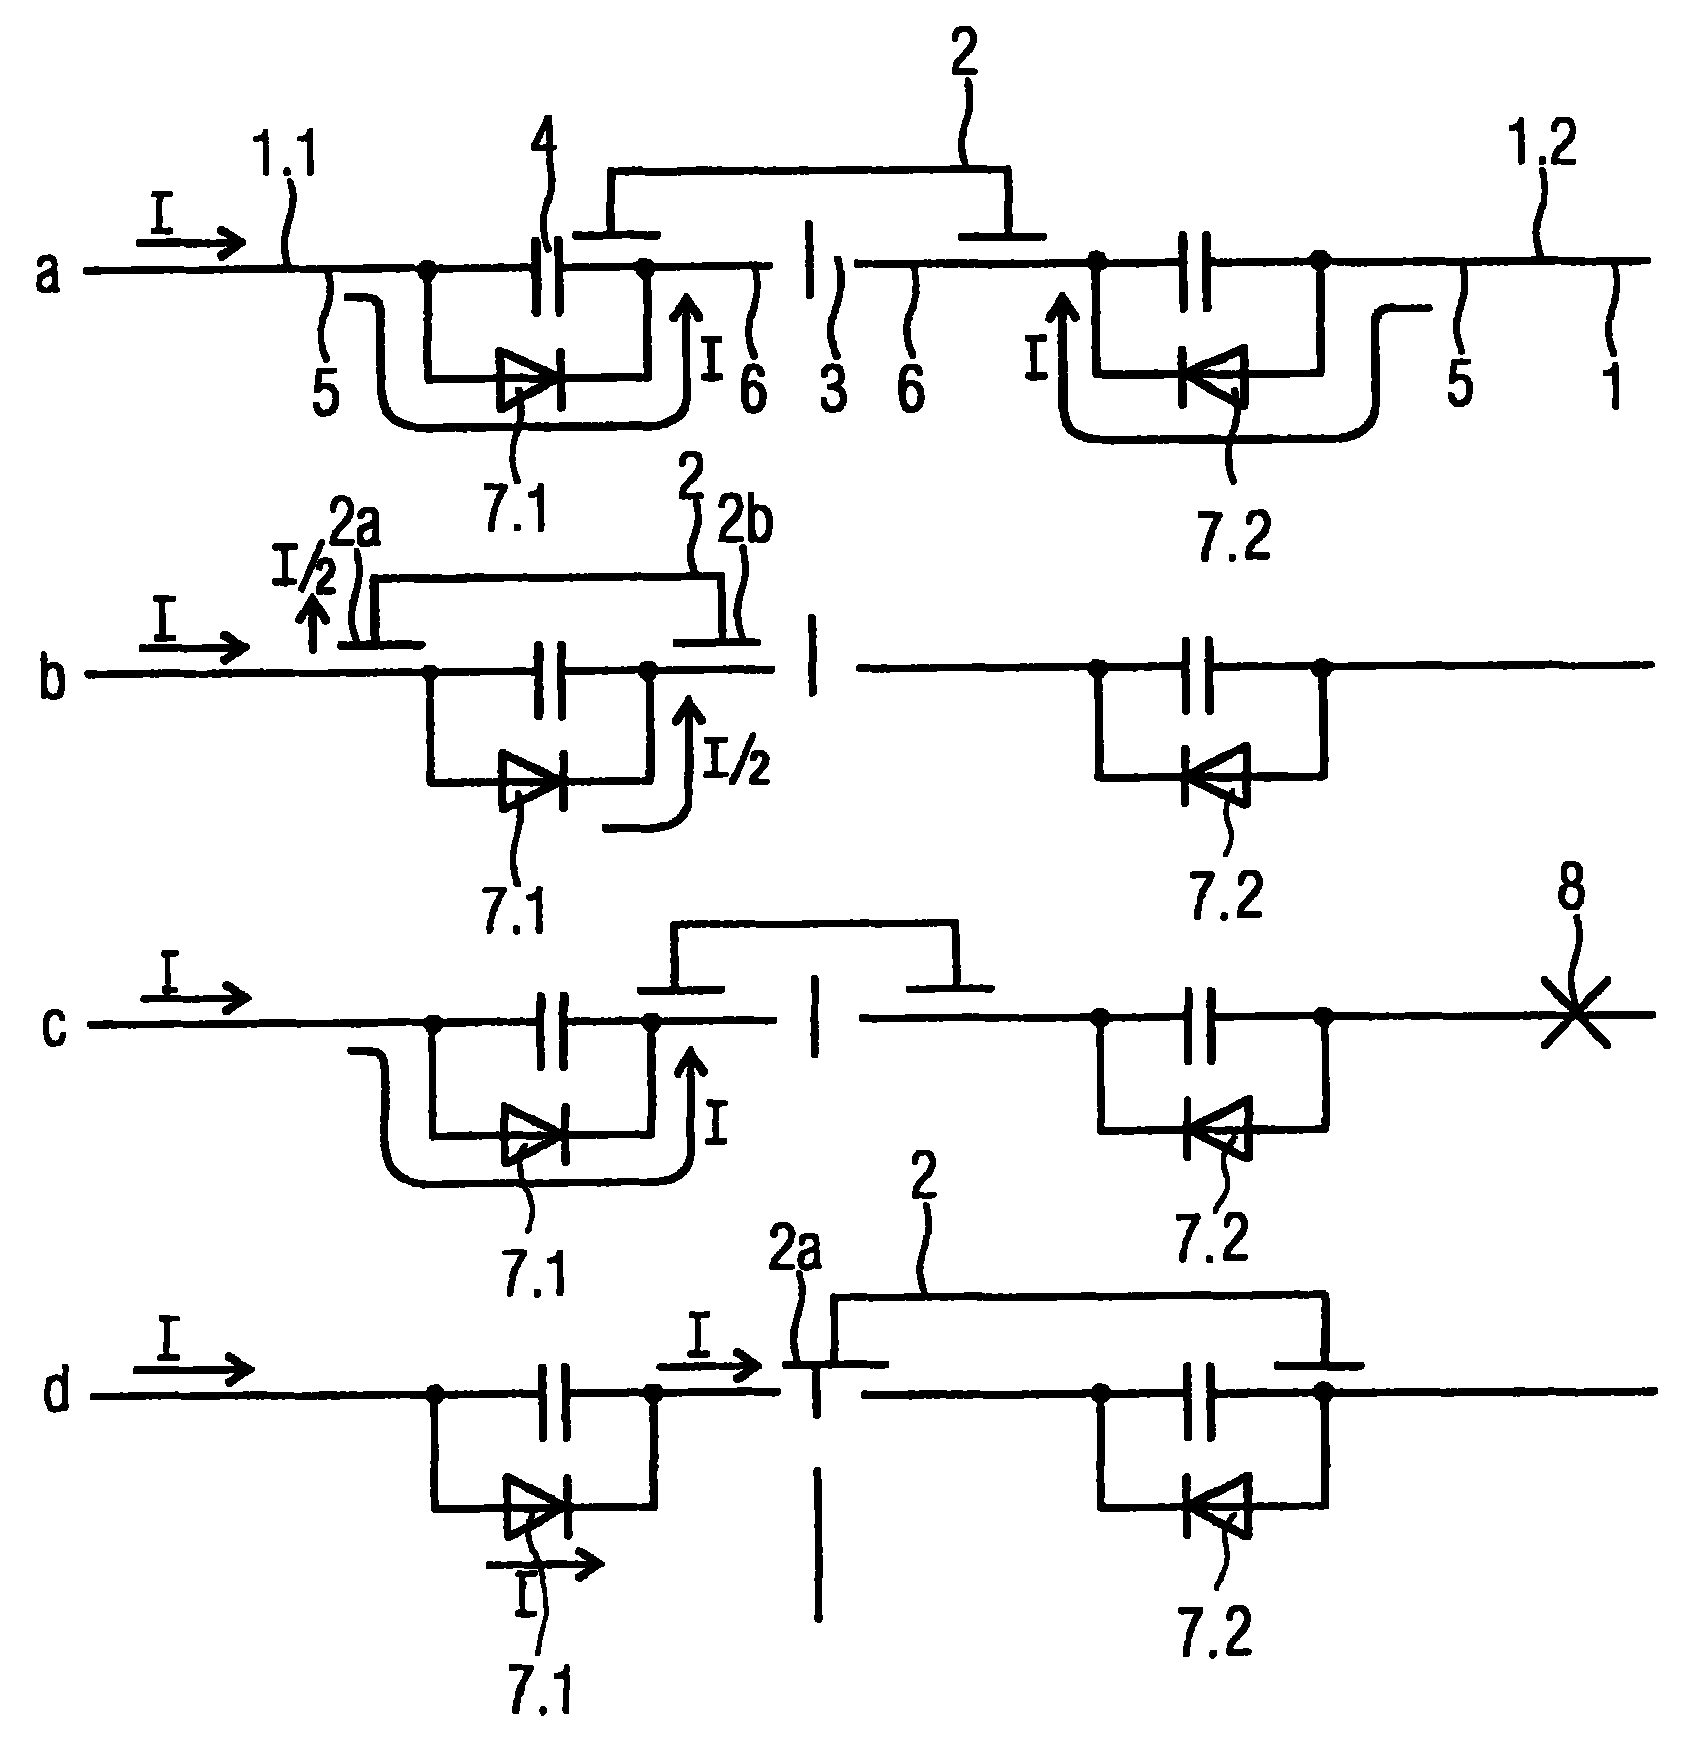 Power supply system based on bus/current collector